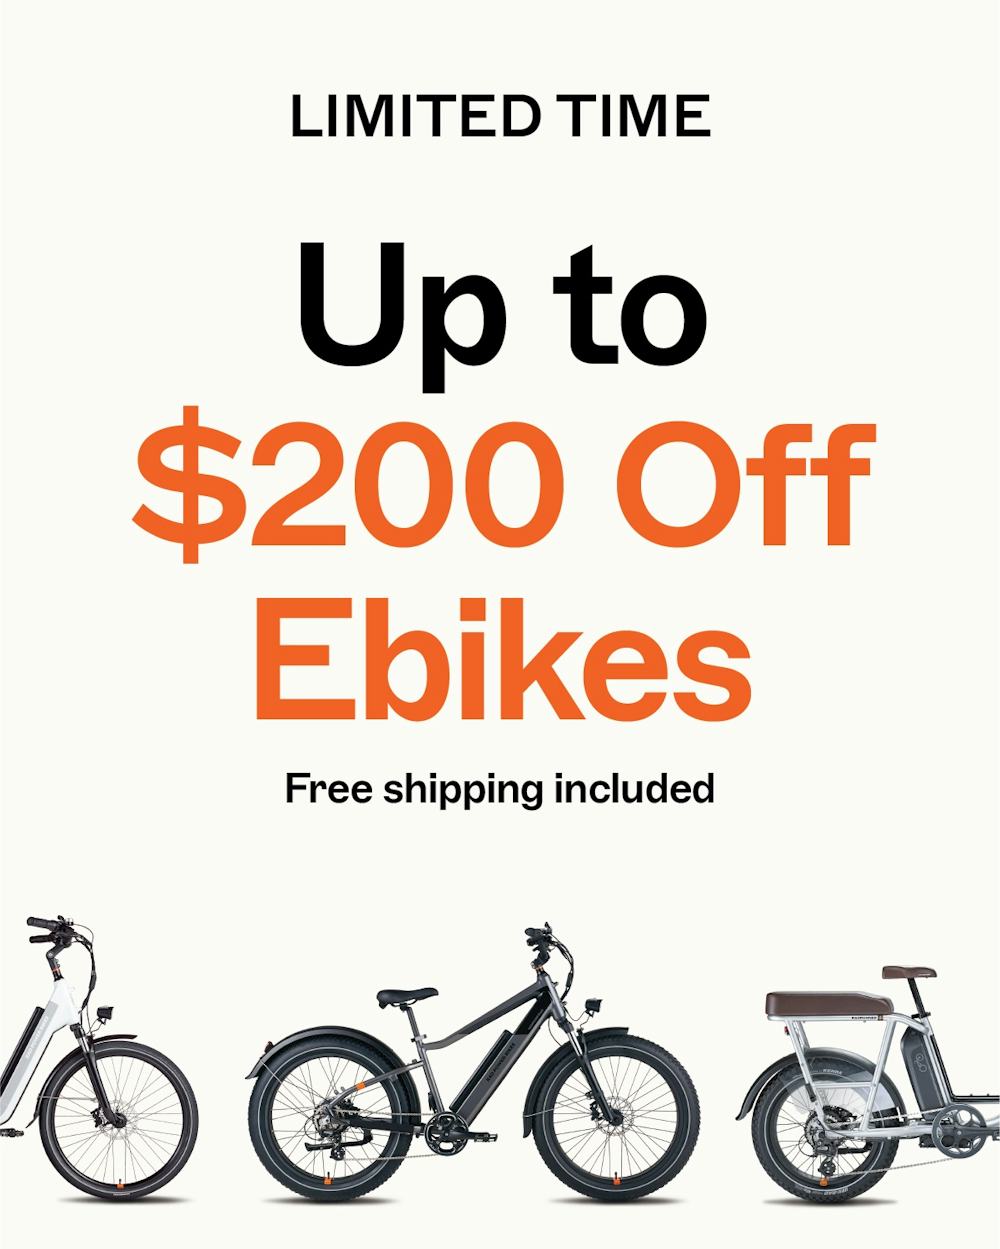 Up to $200 off EBIKES